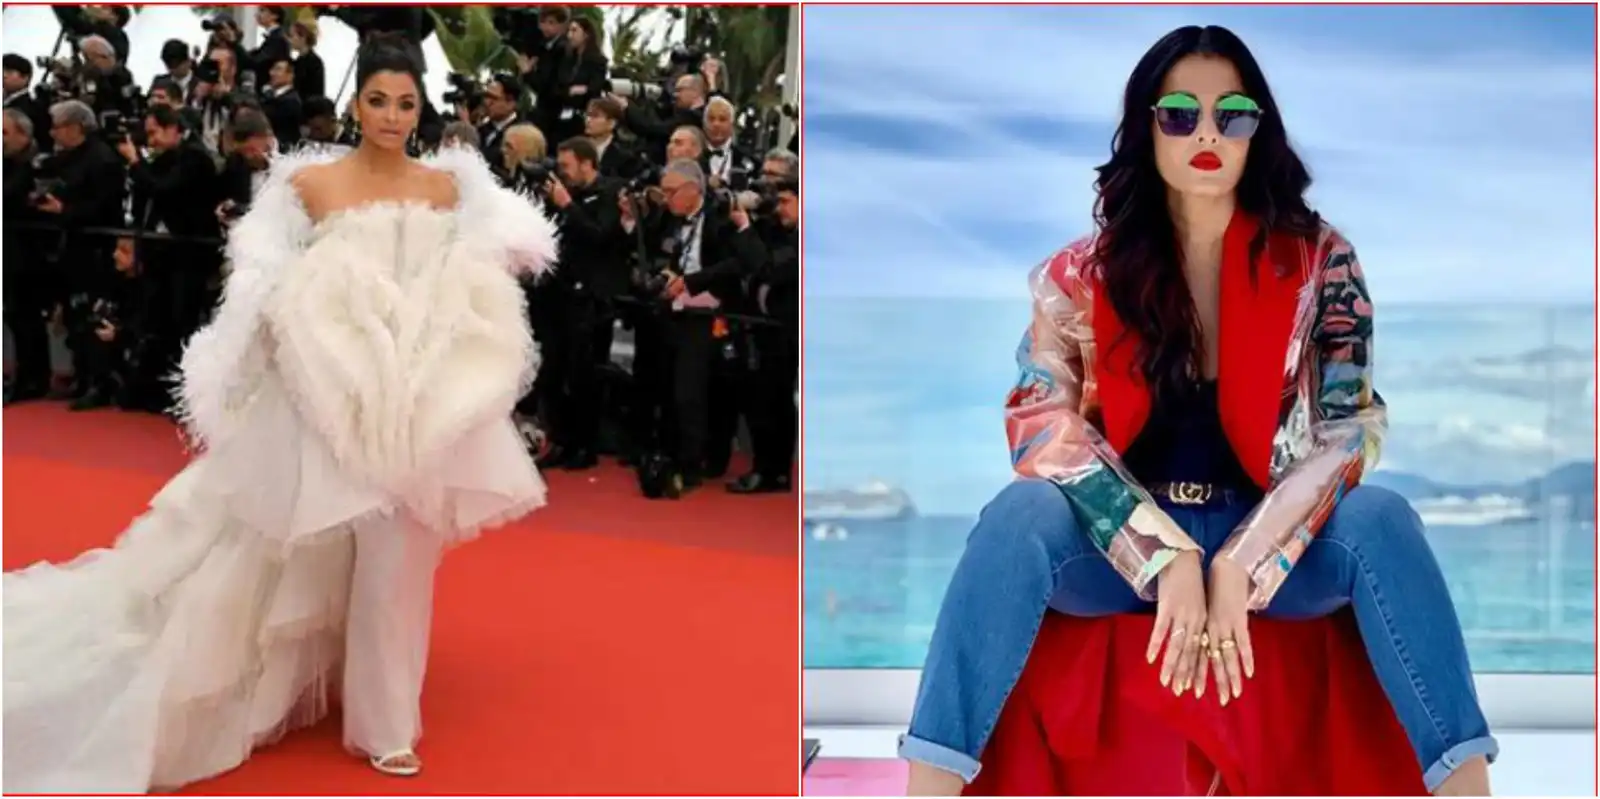 Cannes 2019: Aishwarya Rai Bachchan Justifies The Title Of World's Most Beautiful Woman With These Looks